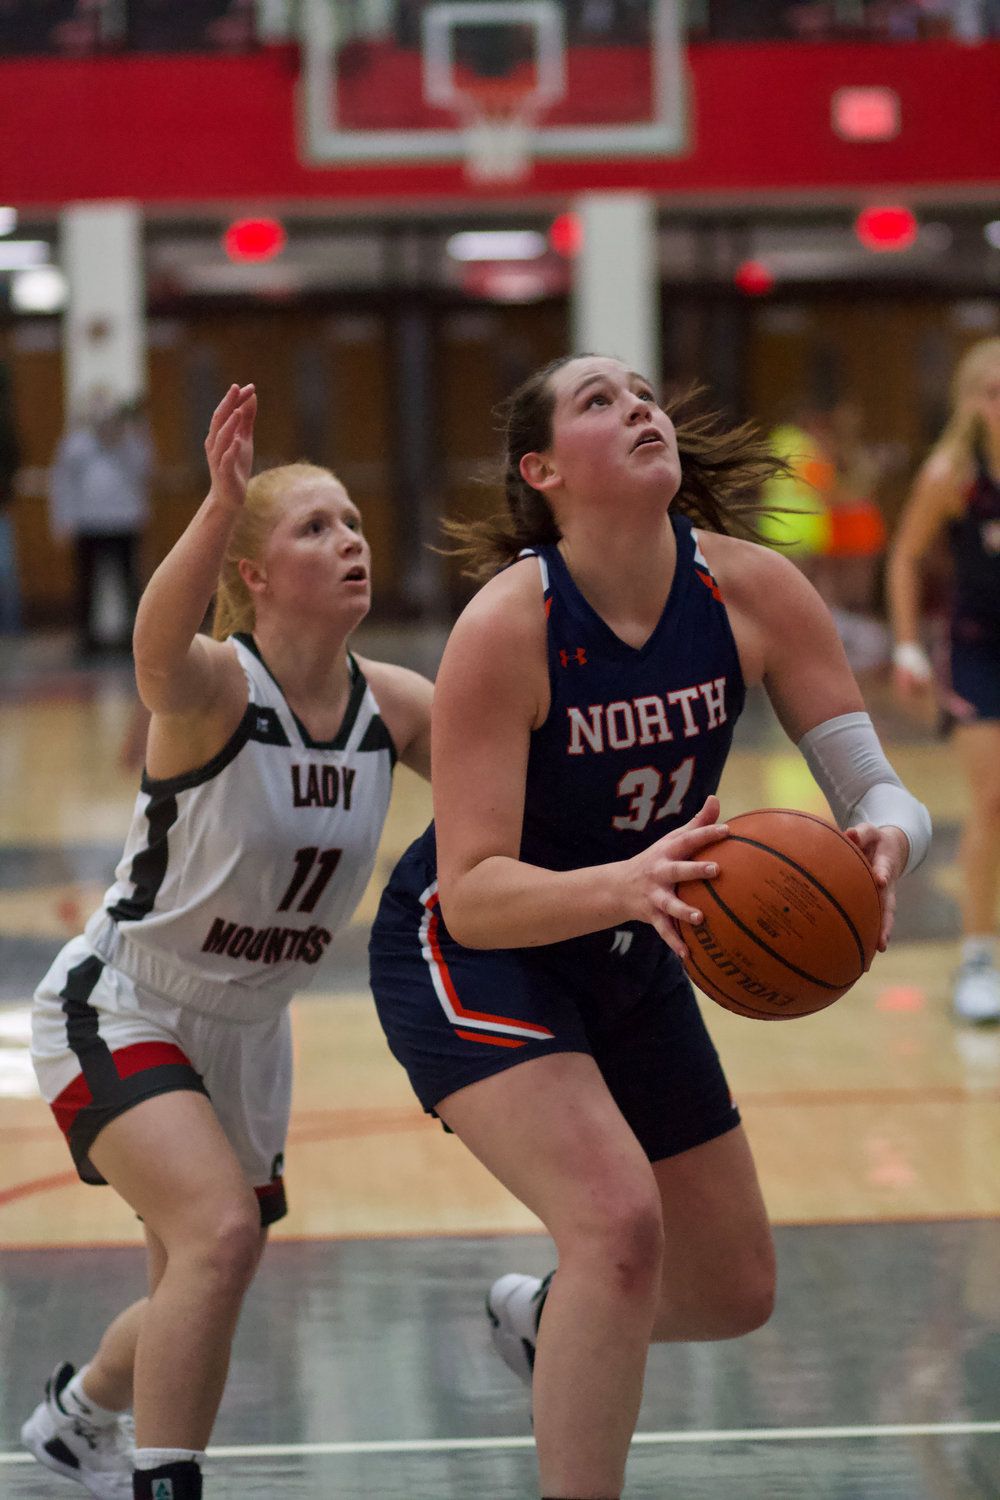 Katie Rice scored 12 points to help North Montgomery claim their first county title since 2017 with a 42-34 win over Southmont.